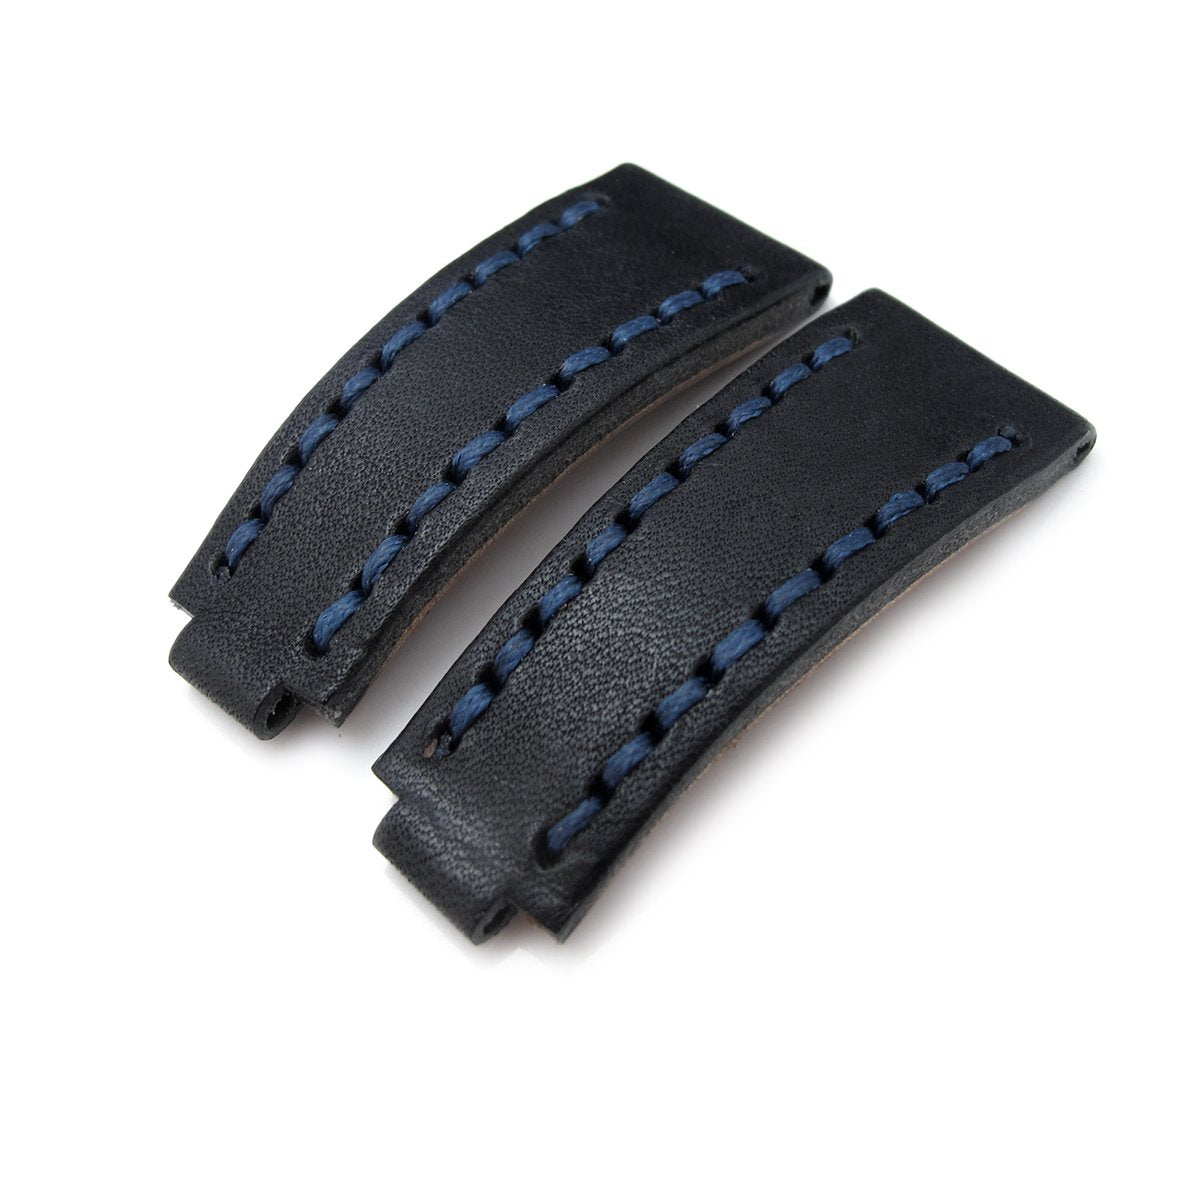 20mm MiLTAT RX Collection Watch Strap NERO Black Genuine Calf Navy Blue St. Tailor-made for RX SUB &amp; EXP Strapcode Watch Bands